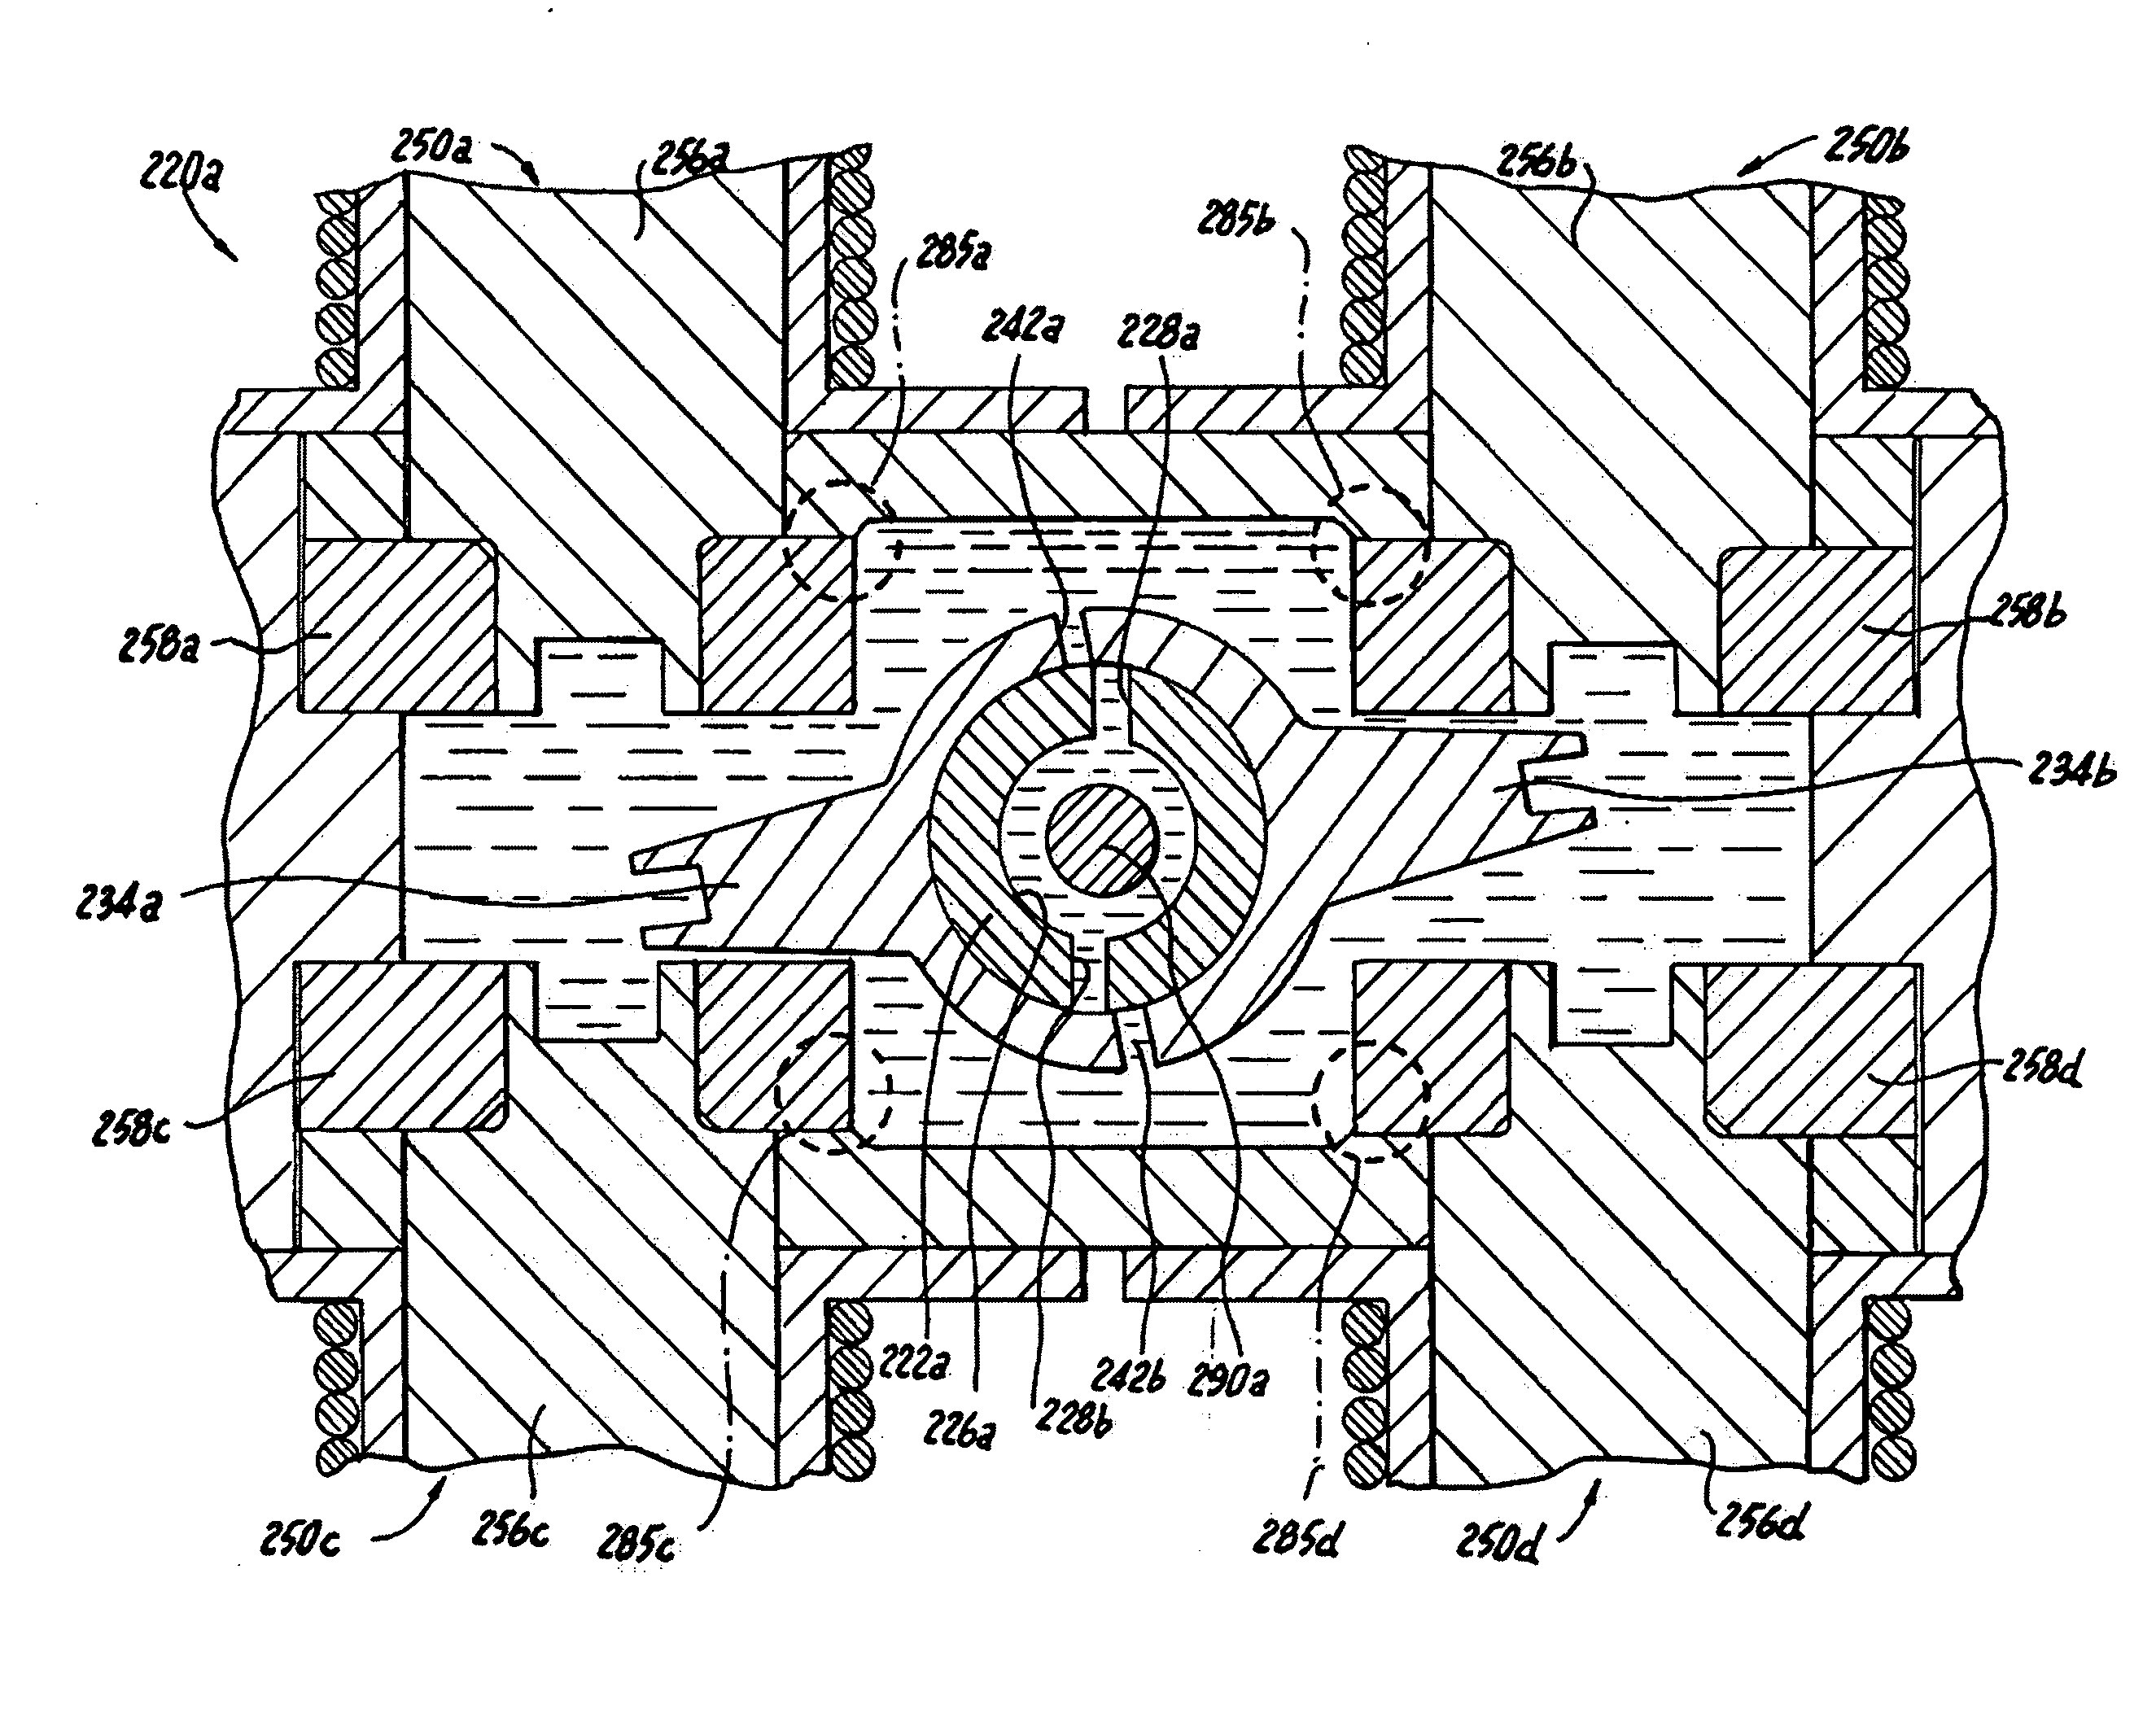 Valve assembly for modulating fuel flow to a gas turbine engine